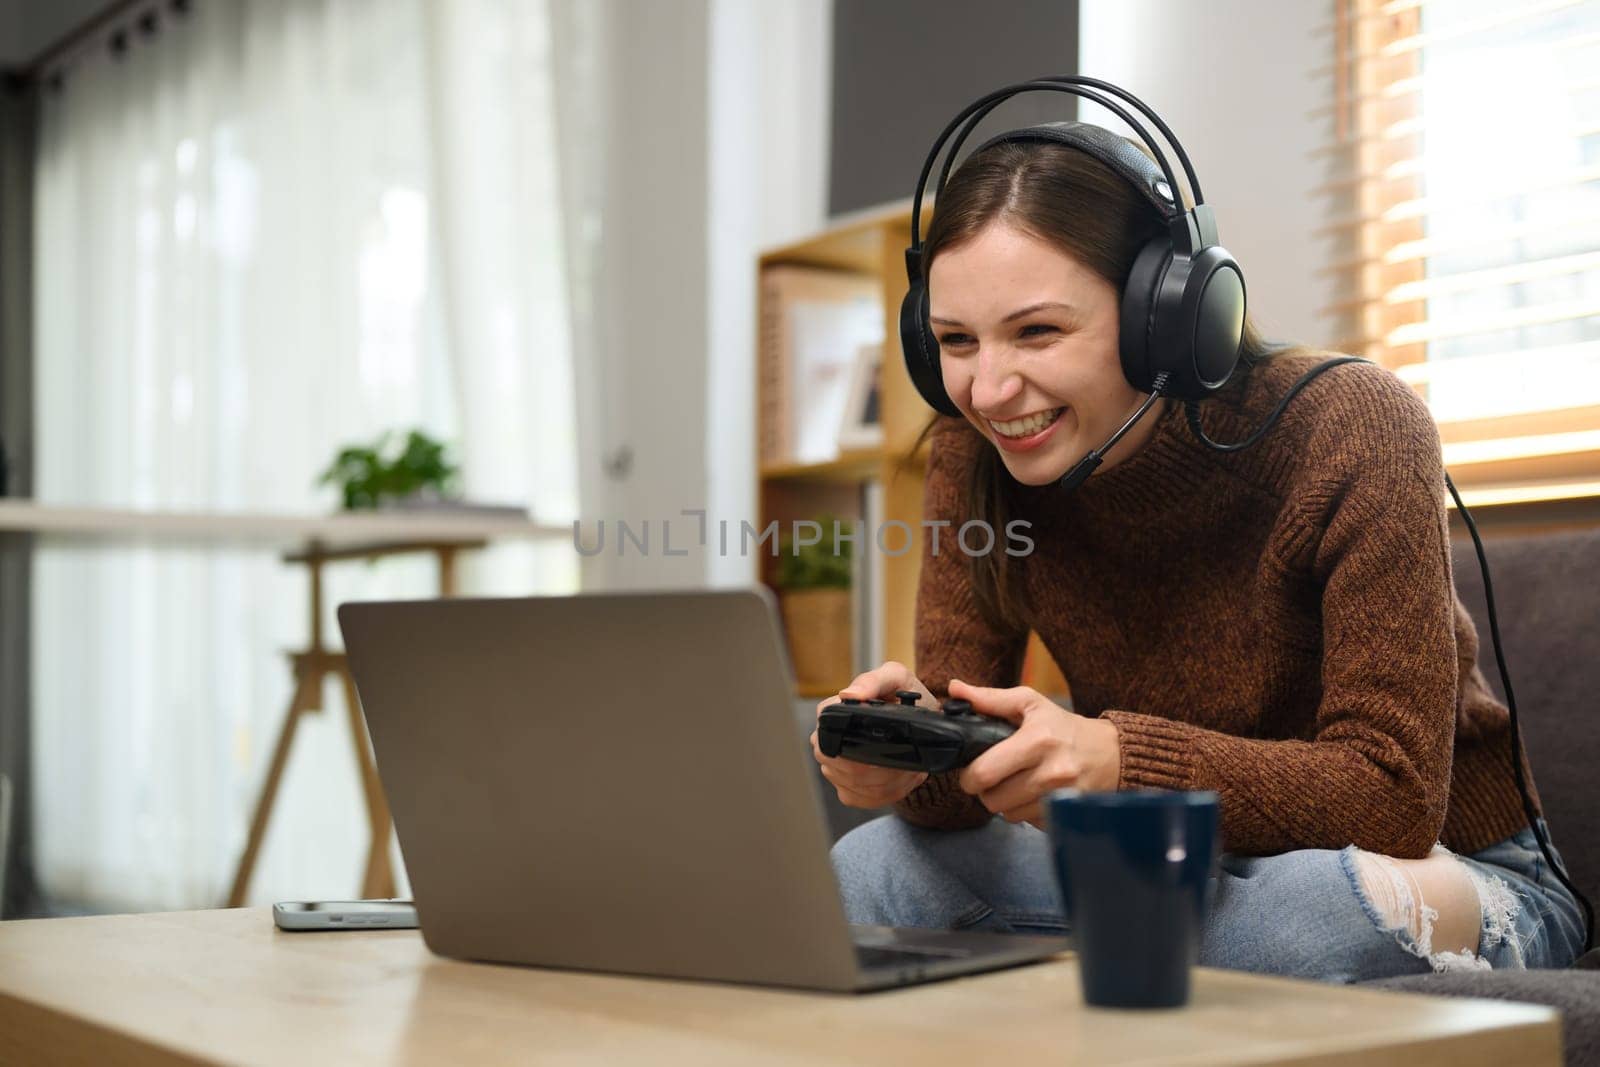 Young caucasian woman in headset holding joystick playing video game on laptop.